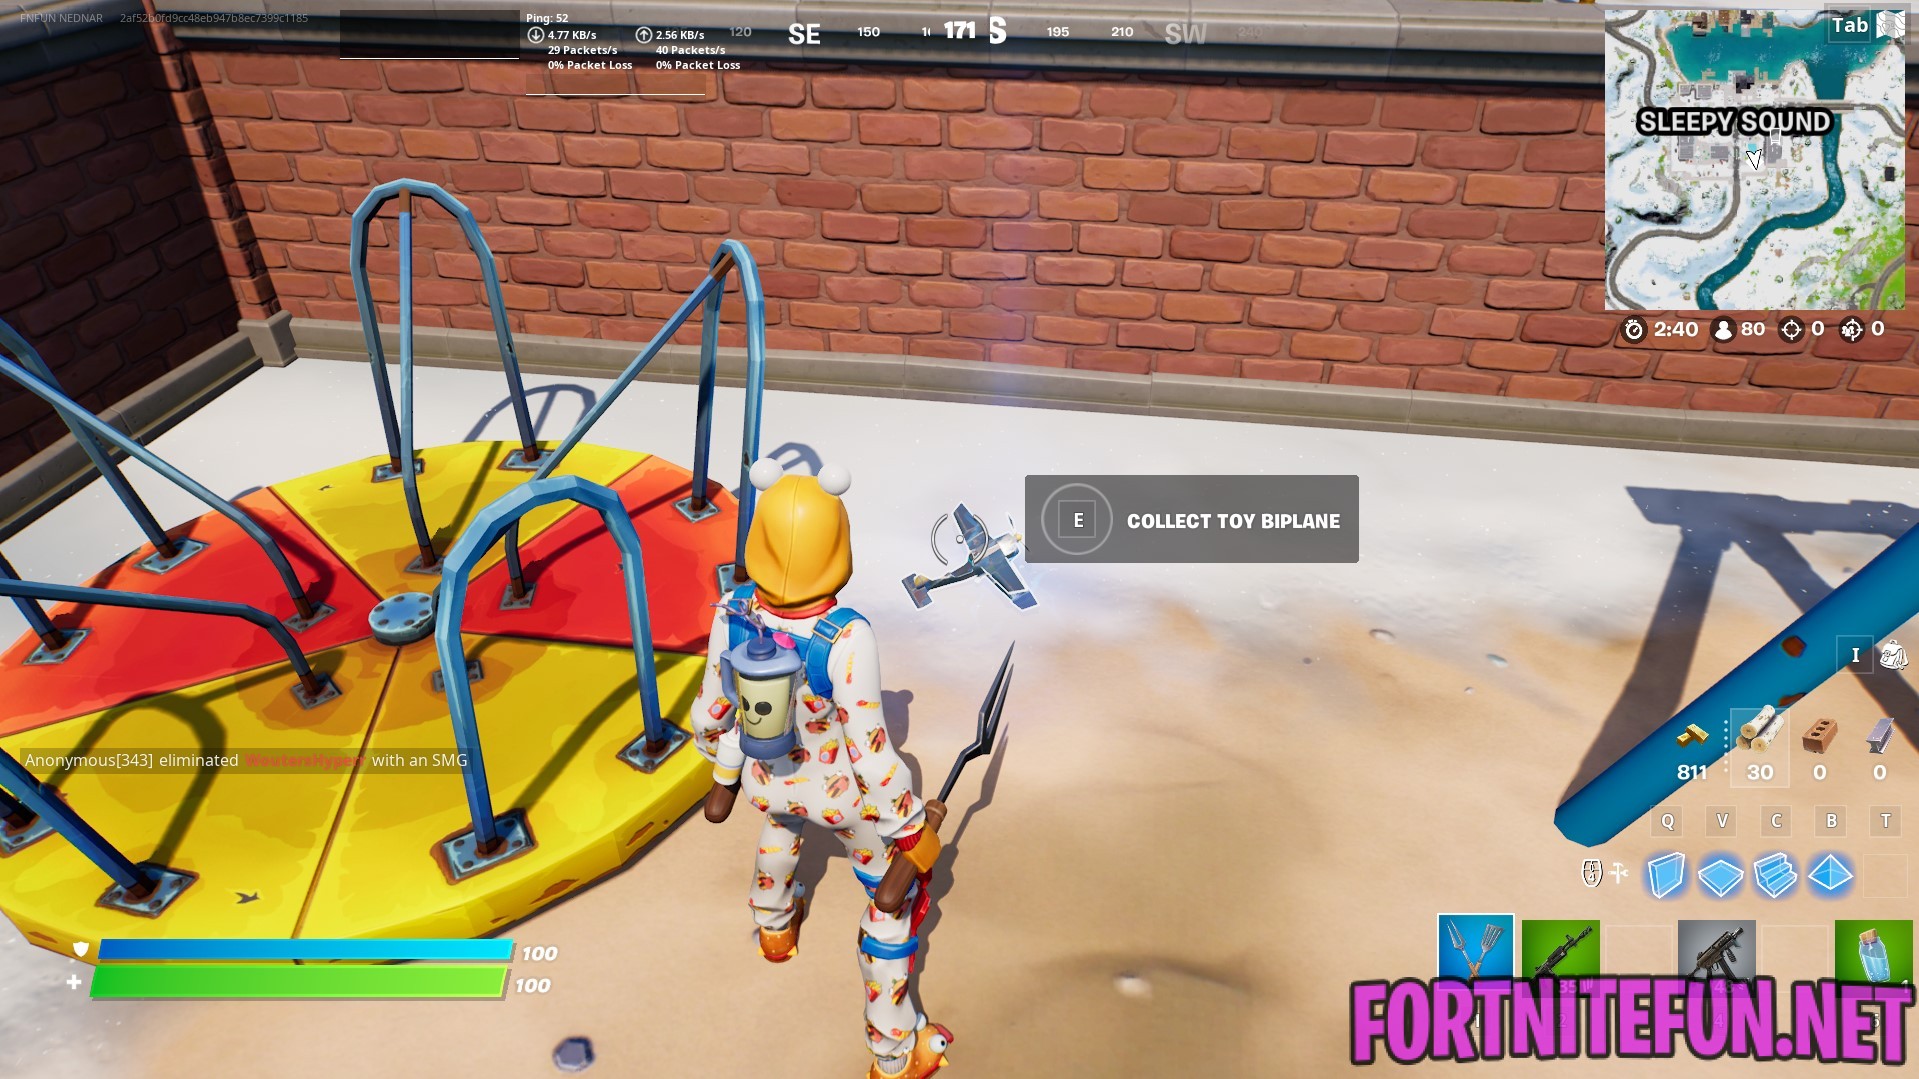 Collect Toy Biplanes at Condo Canyon, Greasy Grove, or Sleepy Sound - Winterfest 2021 challenge  